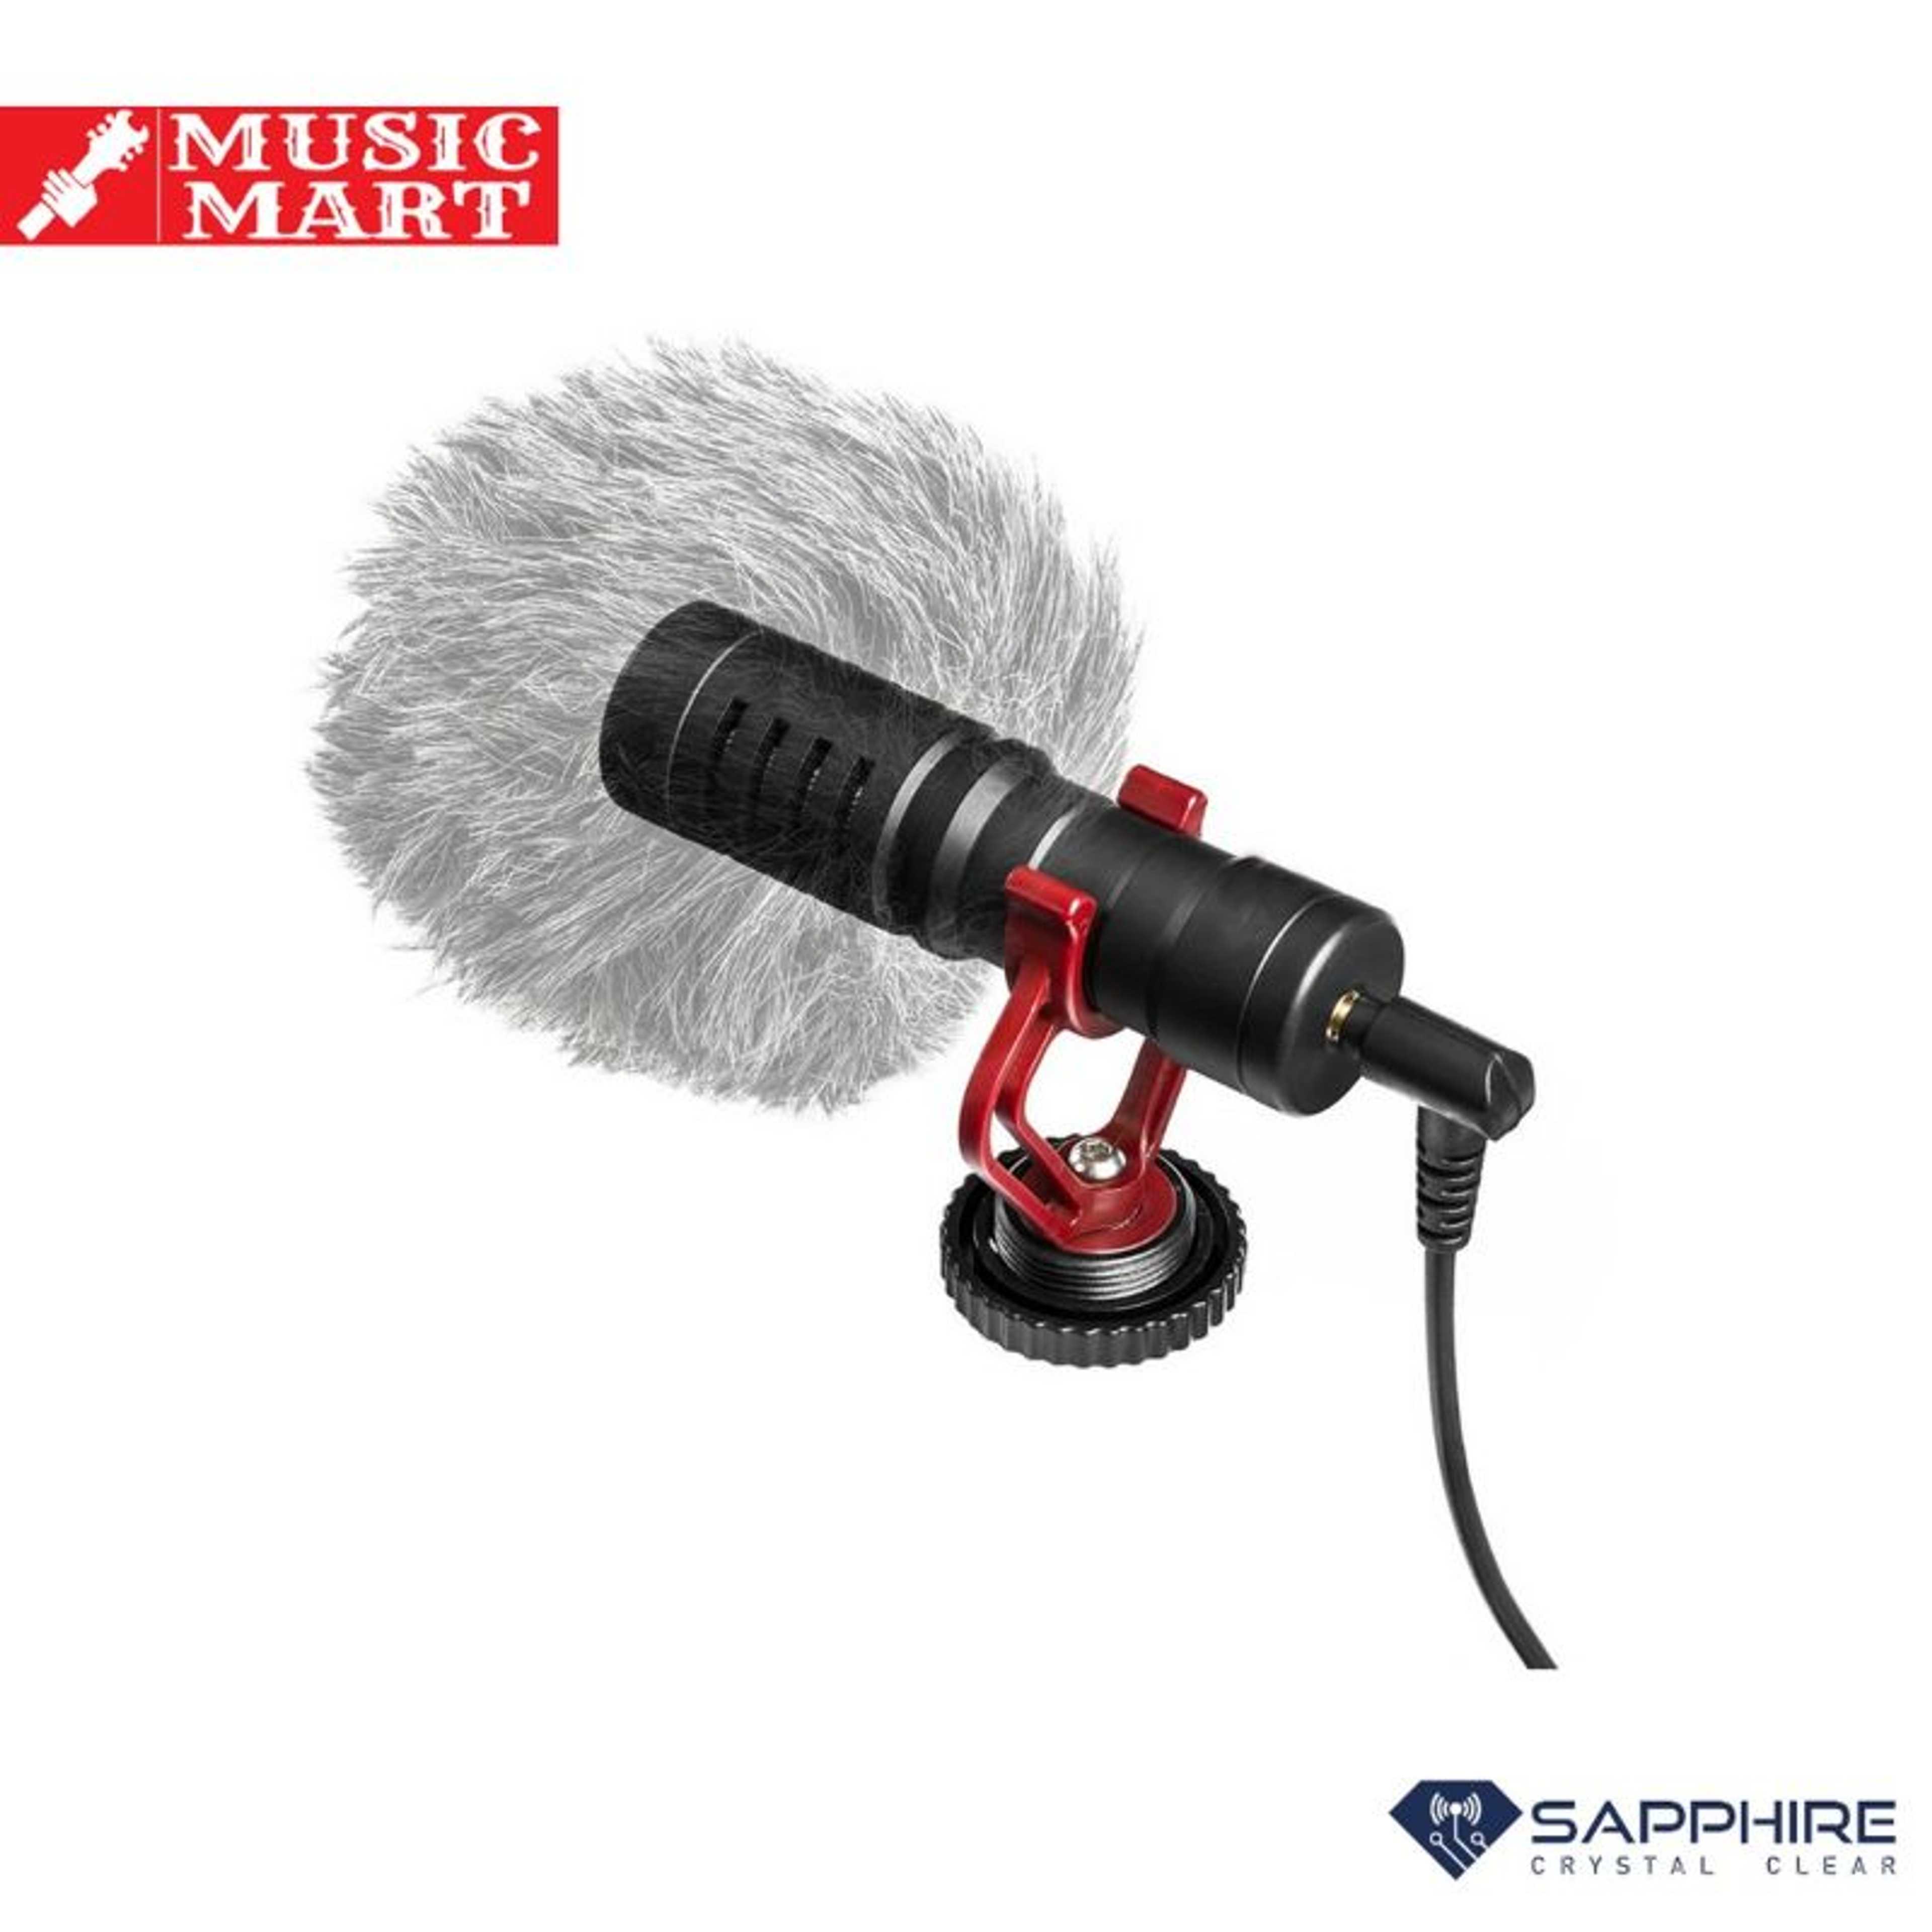 UNIVERSAL CARDIOID MICROPHONE WITH DSLR KIT - CRYSTAL CLEAR VOICE - COMPATIBLE WITH ALL TYPE OF DEVICES CAMERAS ETC. - EXCELLENT AND PRESTIGIOUS QUALITY